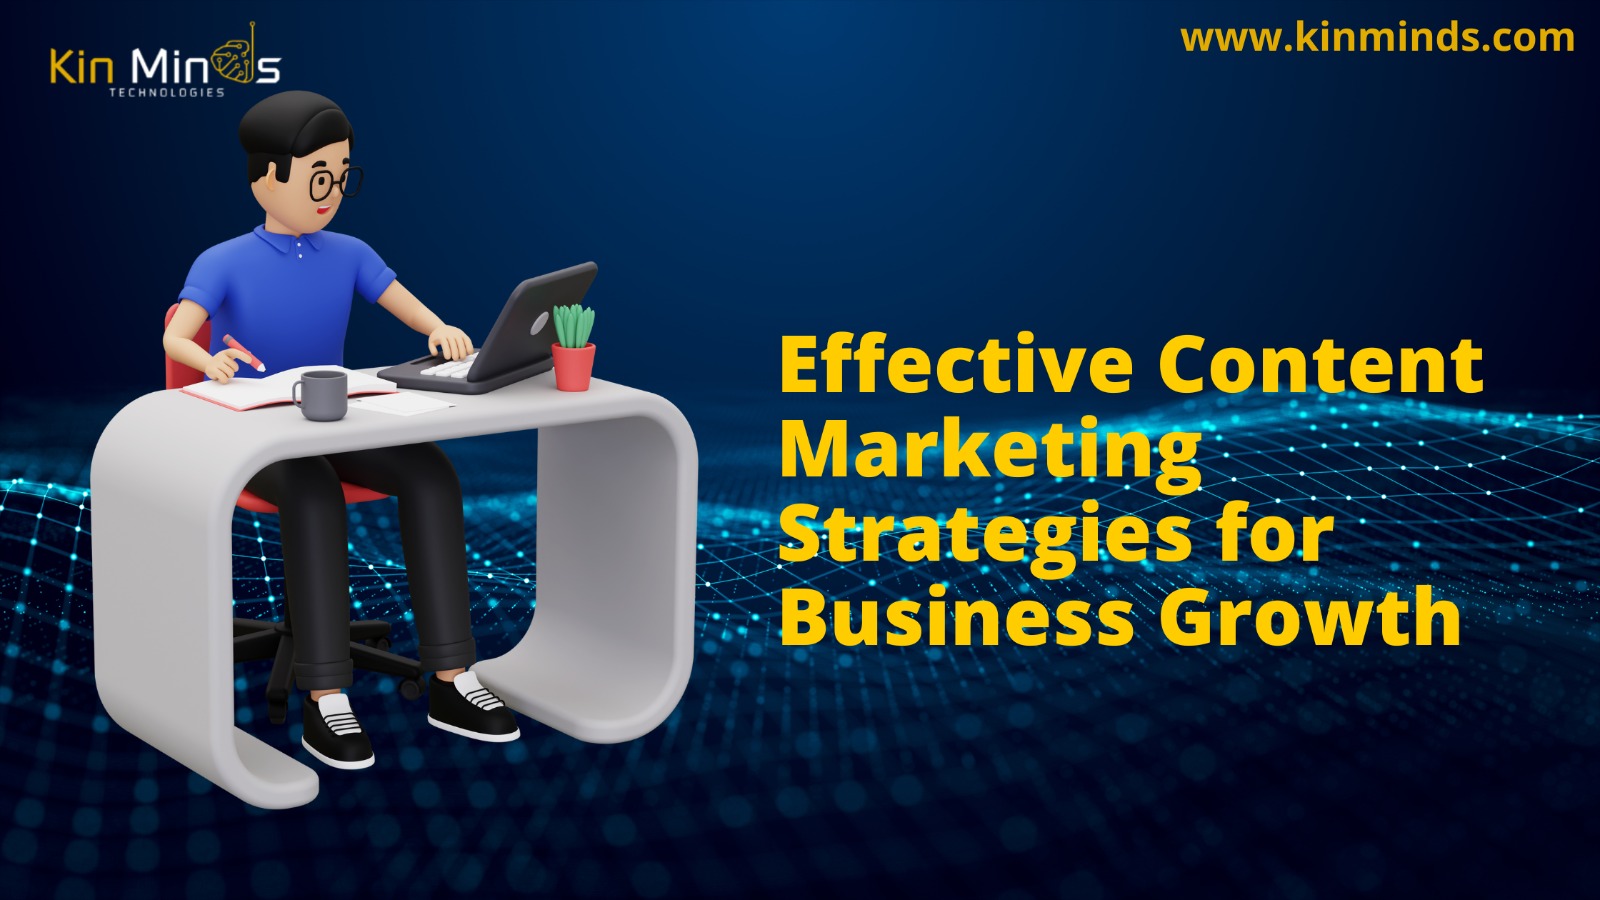 Effective Content Marketing Strategies for Business Growth